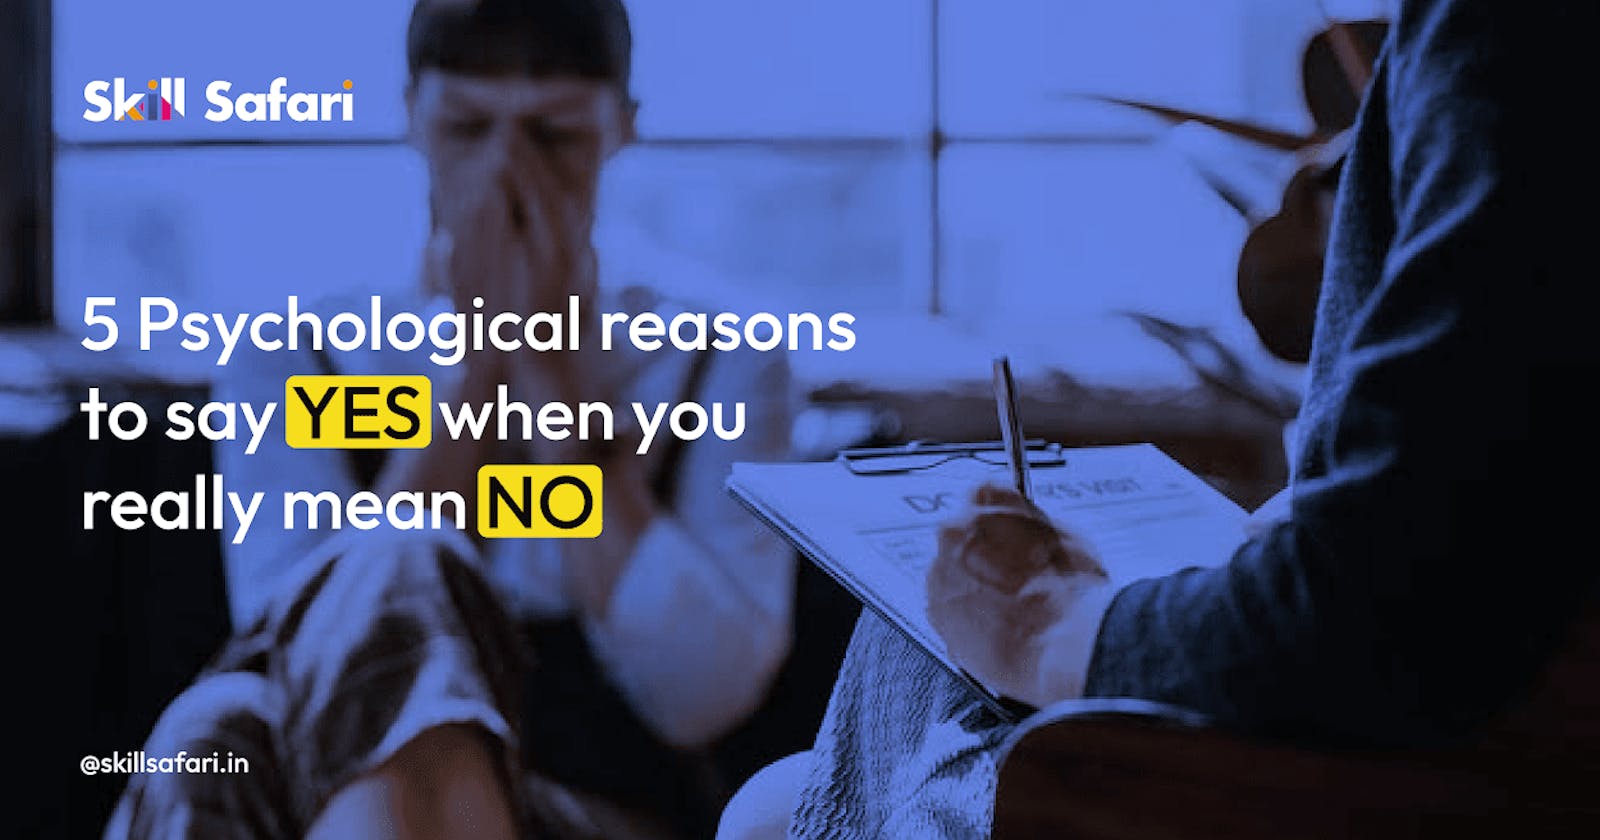 5 Psychological reason to say YES when you really mean NO